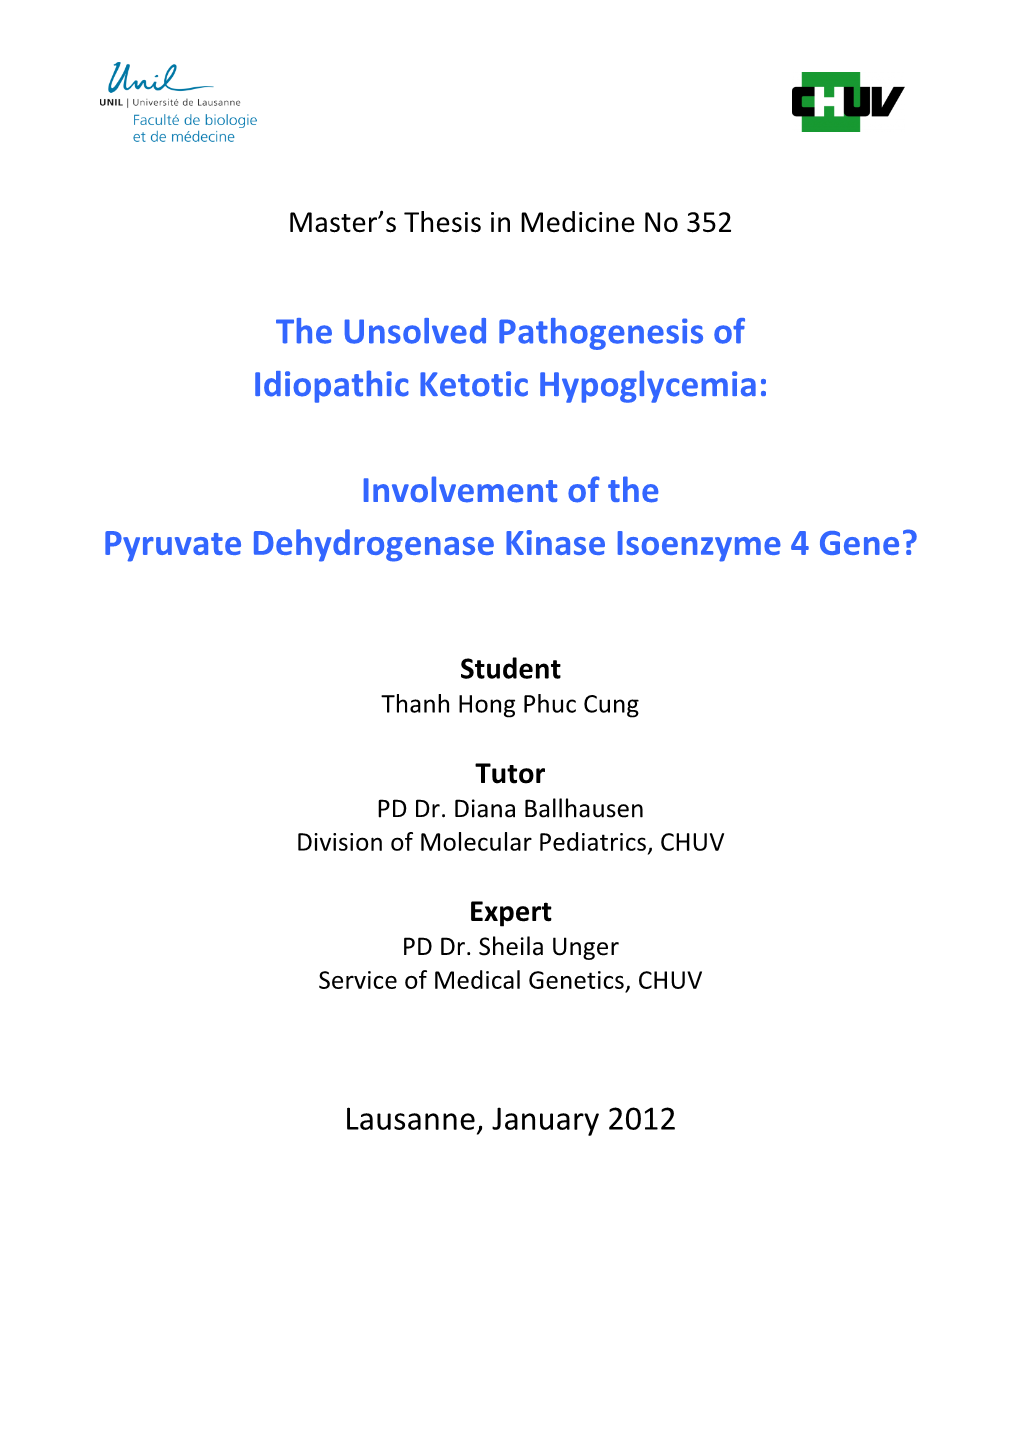 The Unsolved Pathogenesis of Idiopathic Ketotic Hypoglycemia